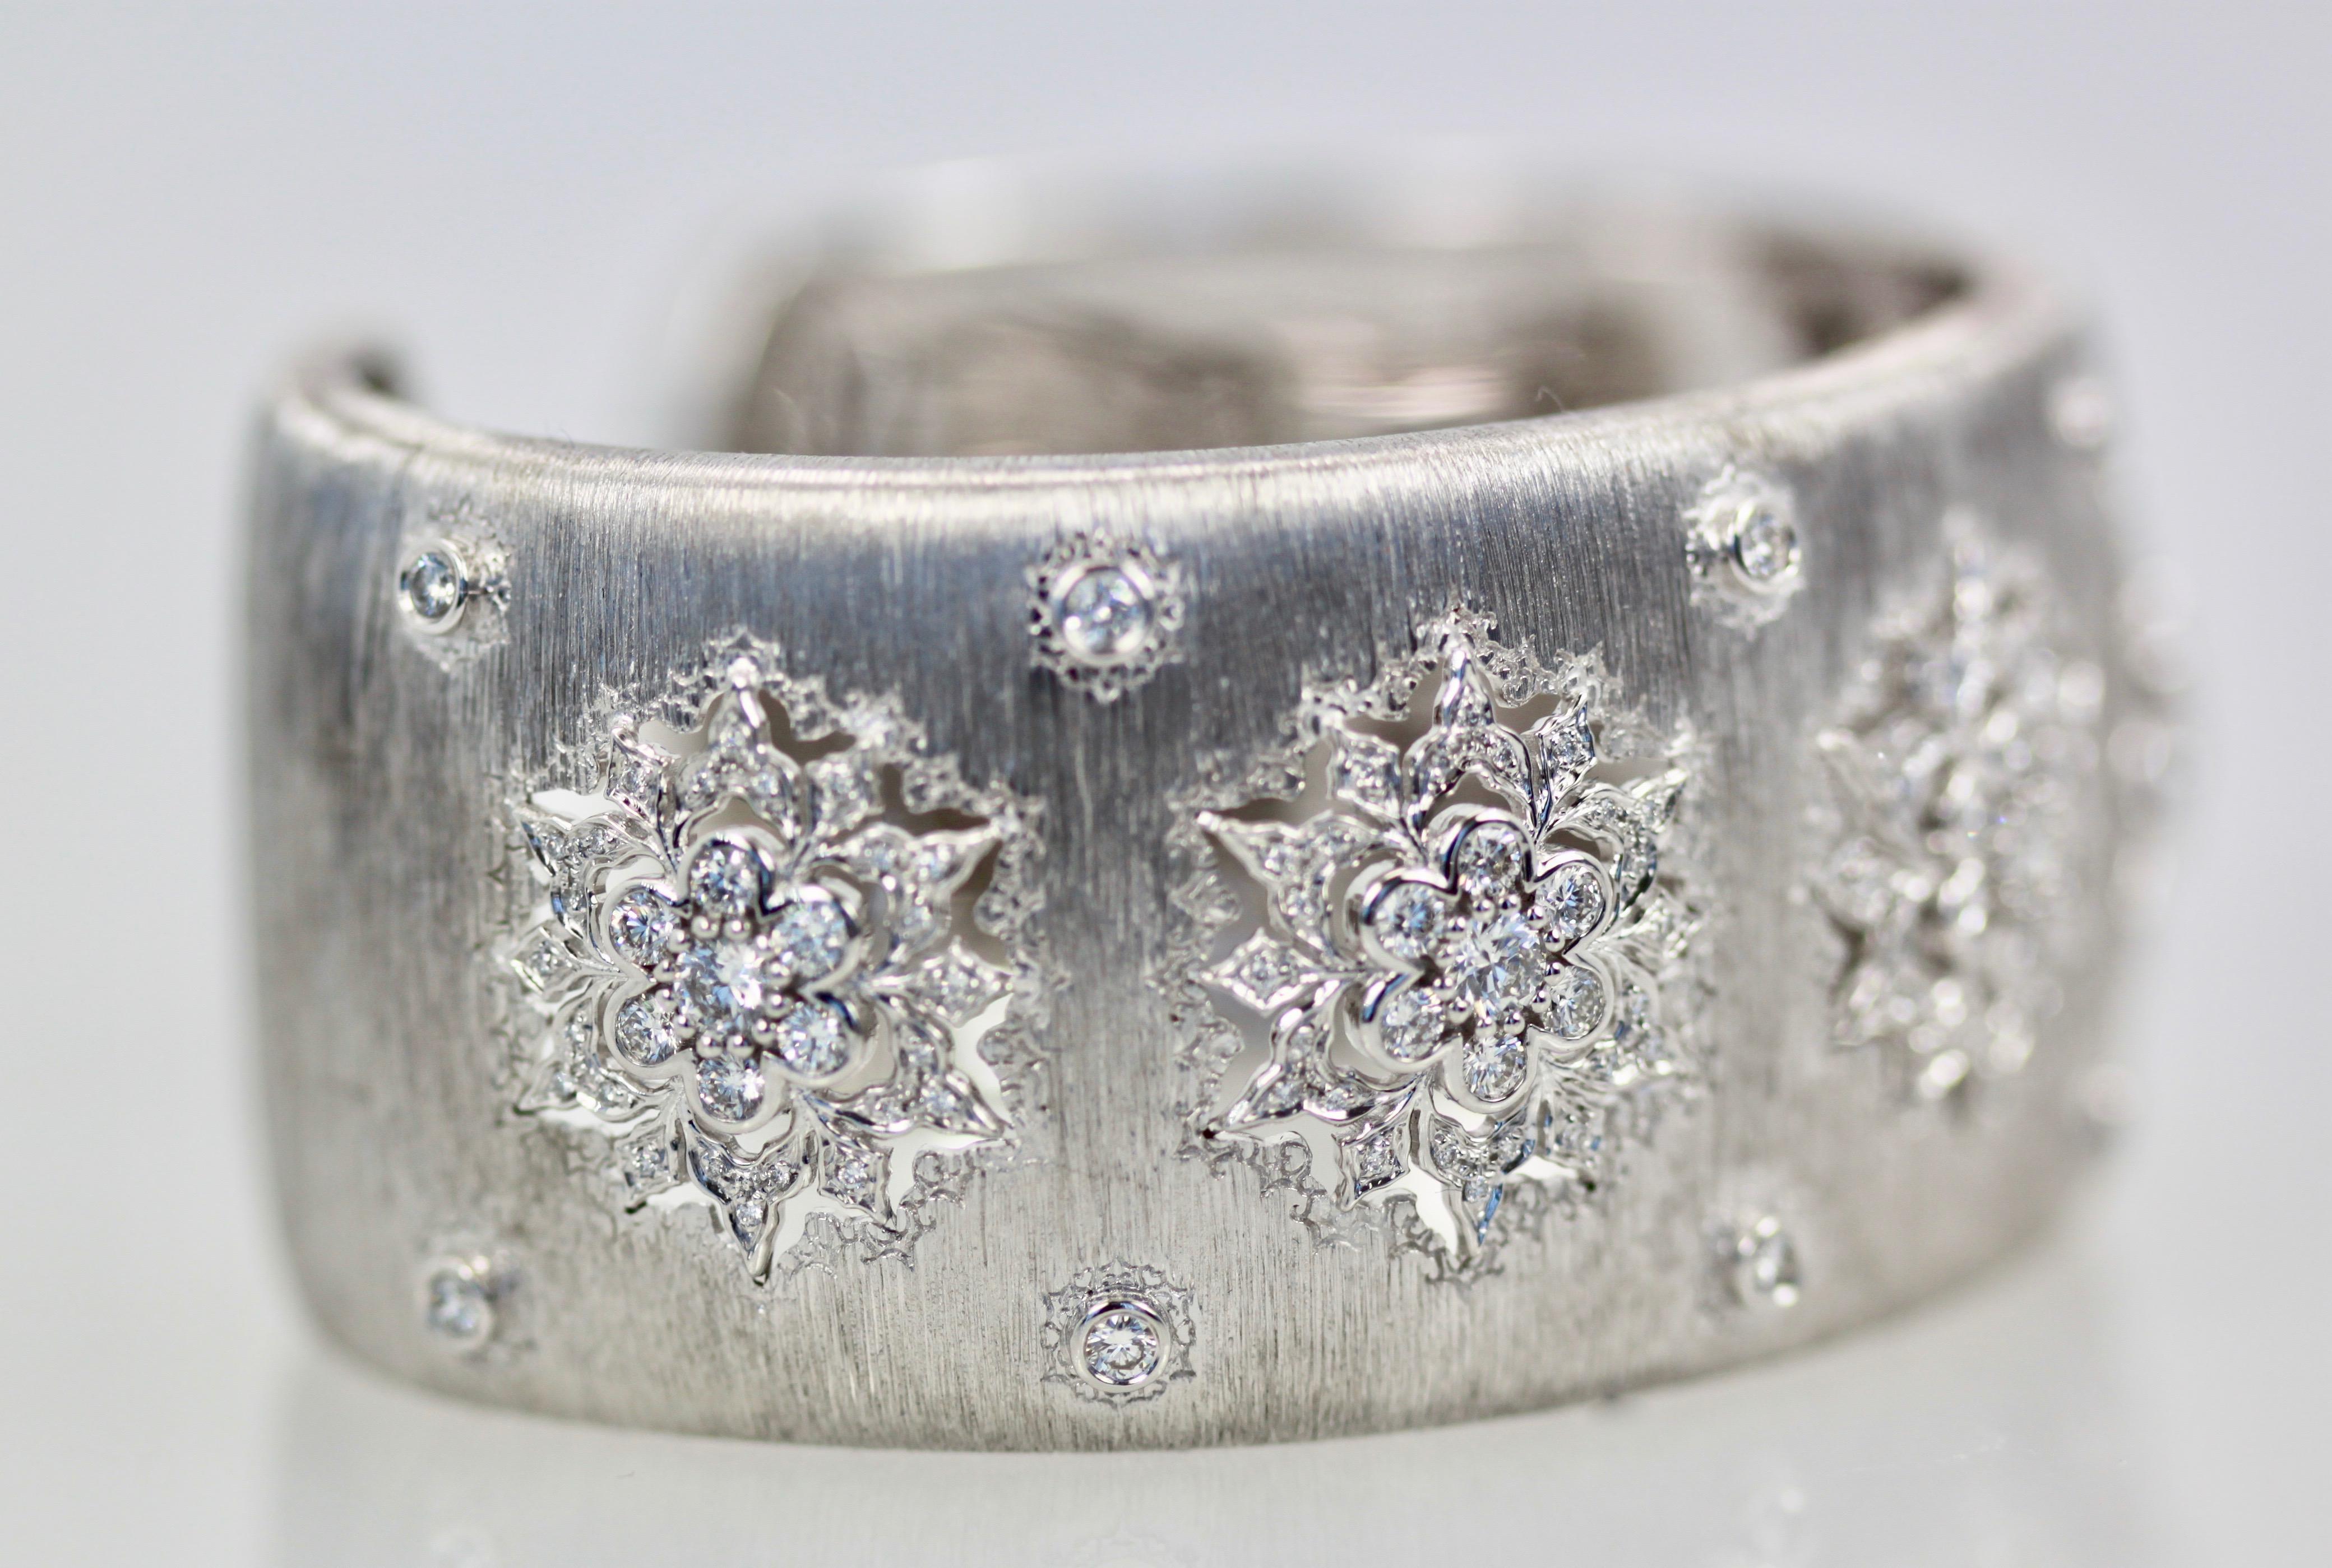 This White Gold Buccellati Wide Bracelet is covered in Diamonds with a total of 5 Carats and it is brushed detailed gold.  There are 5 snowflake detailed and cut out as lace and is filled with Diamonds.  The Diamonds are color F and clarity VS1 and